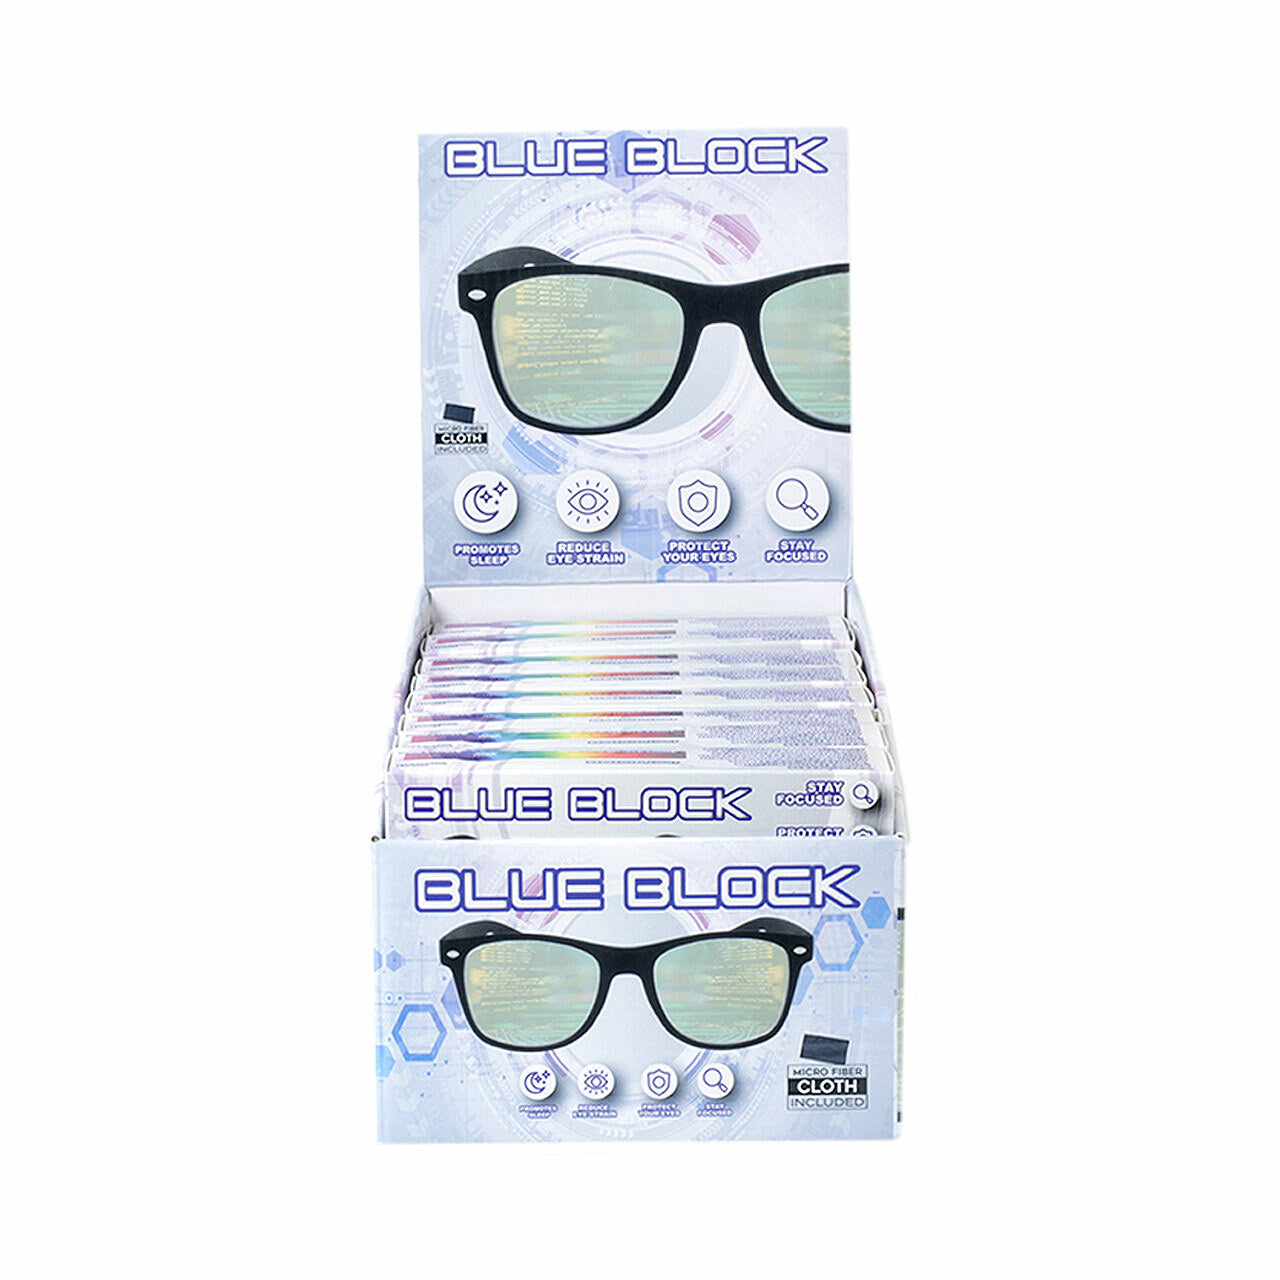 Acrylic Blue Light Block Glasses Cardboard Counter Display 18 Pieces  (Pack of Dozen)